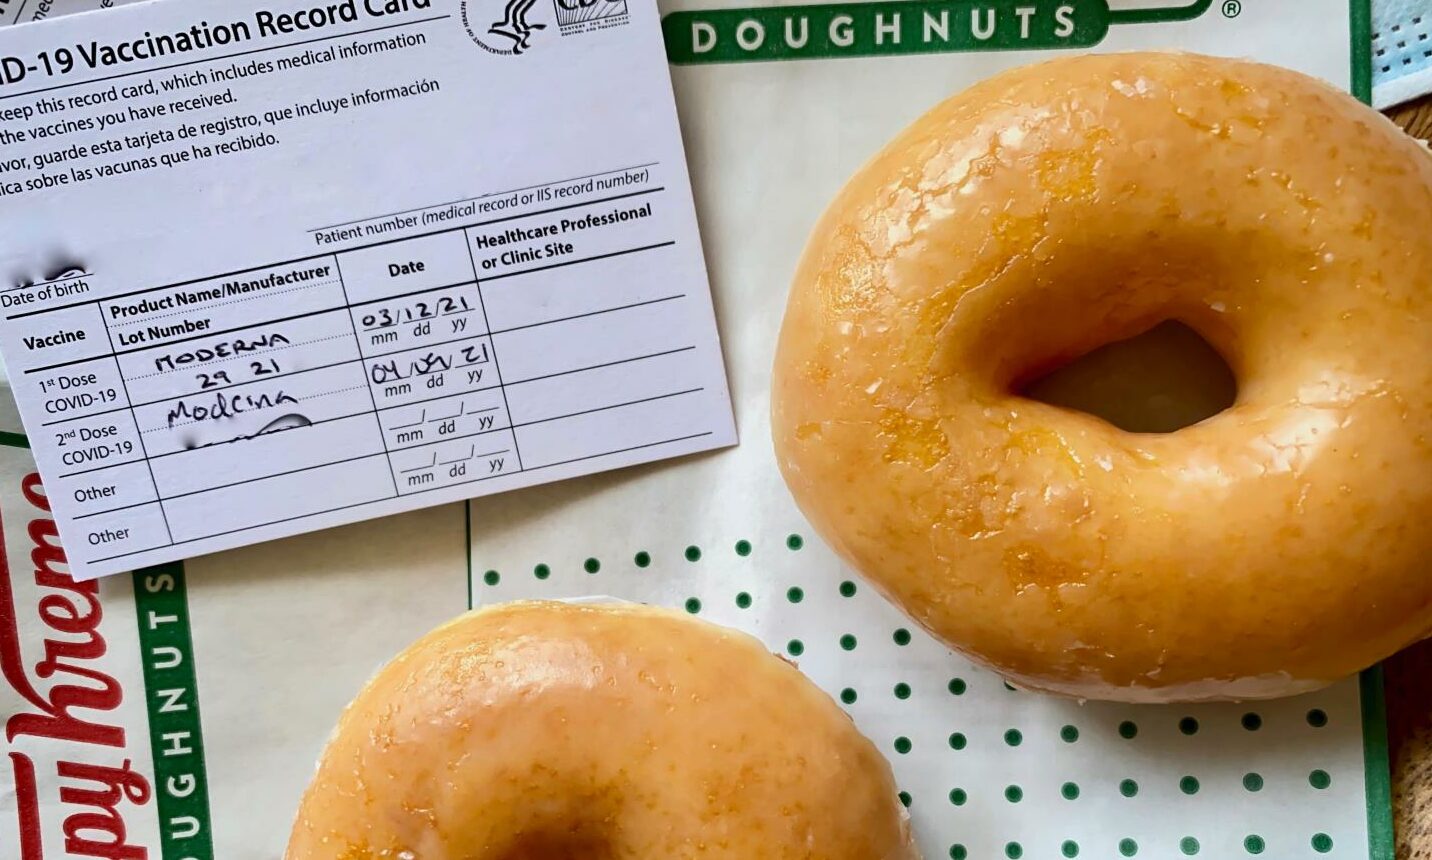 Krispy Kreme Doughnuts offered free products to US customers with proof of Covid vaccination.